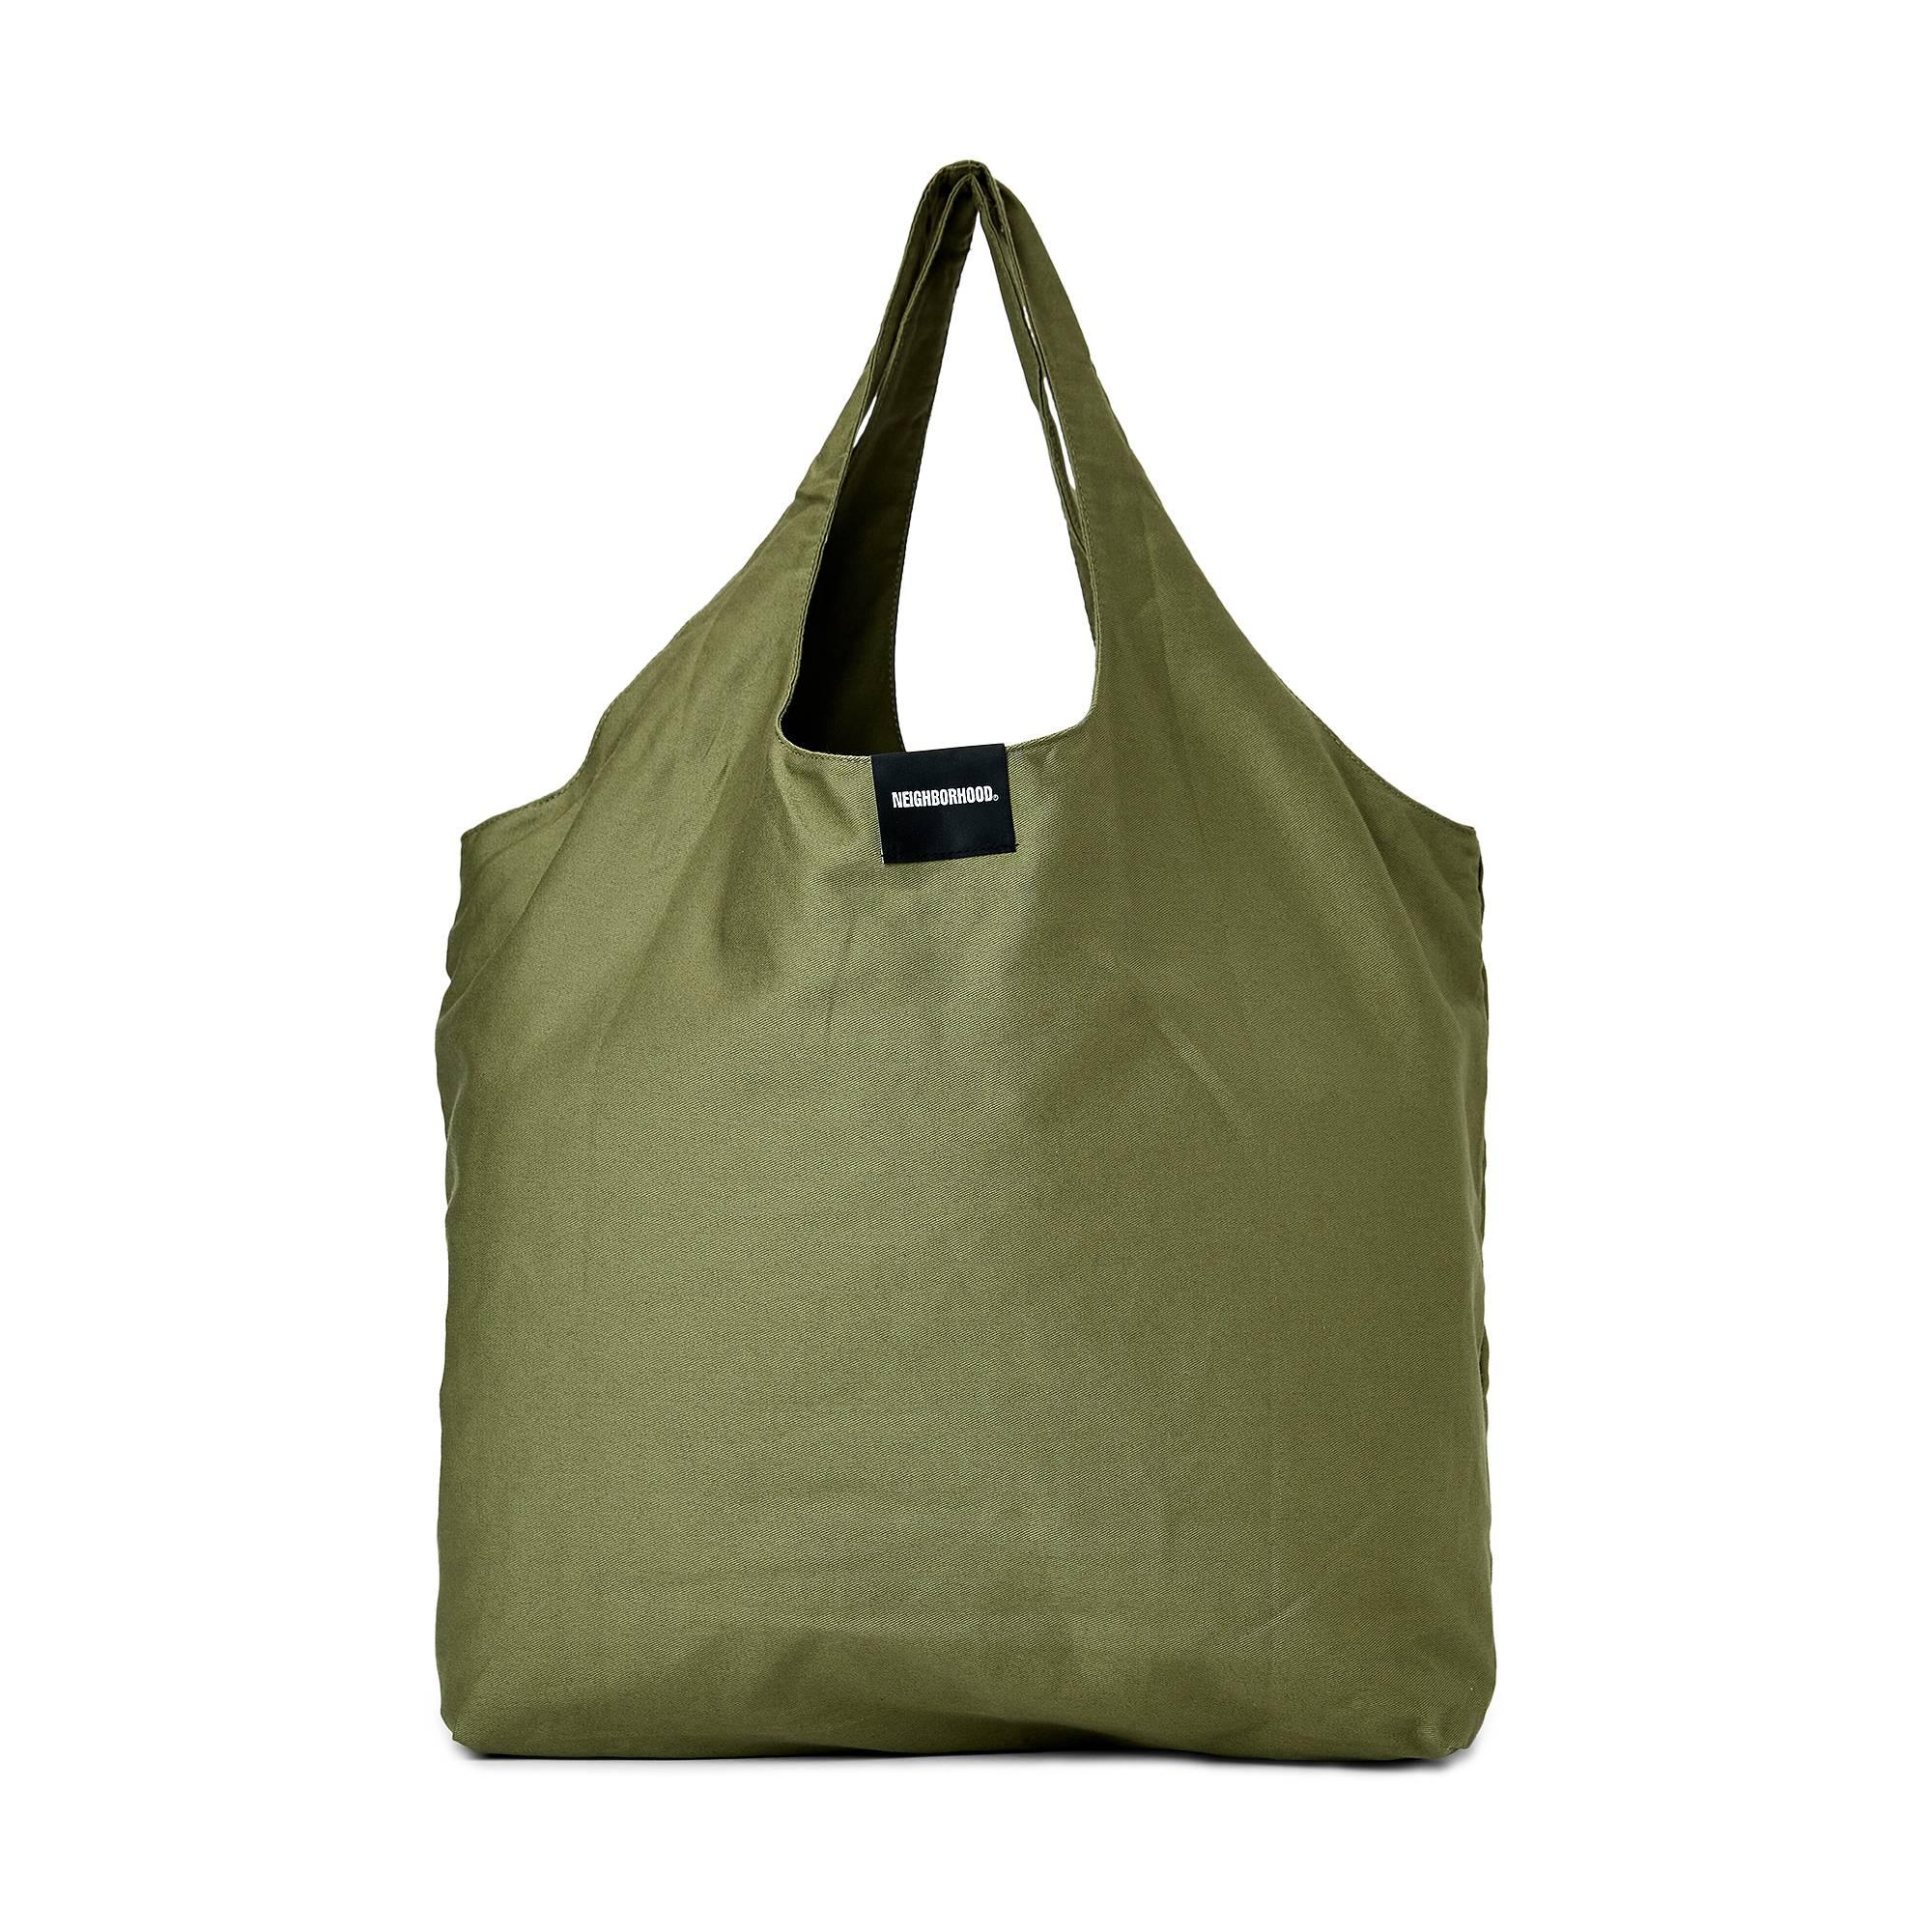 NEIGHBORHOOD 19AW MIL-TOTE トートバッグ OLIVE | www.mariaflorales